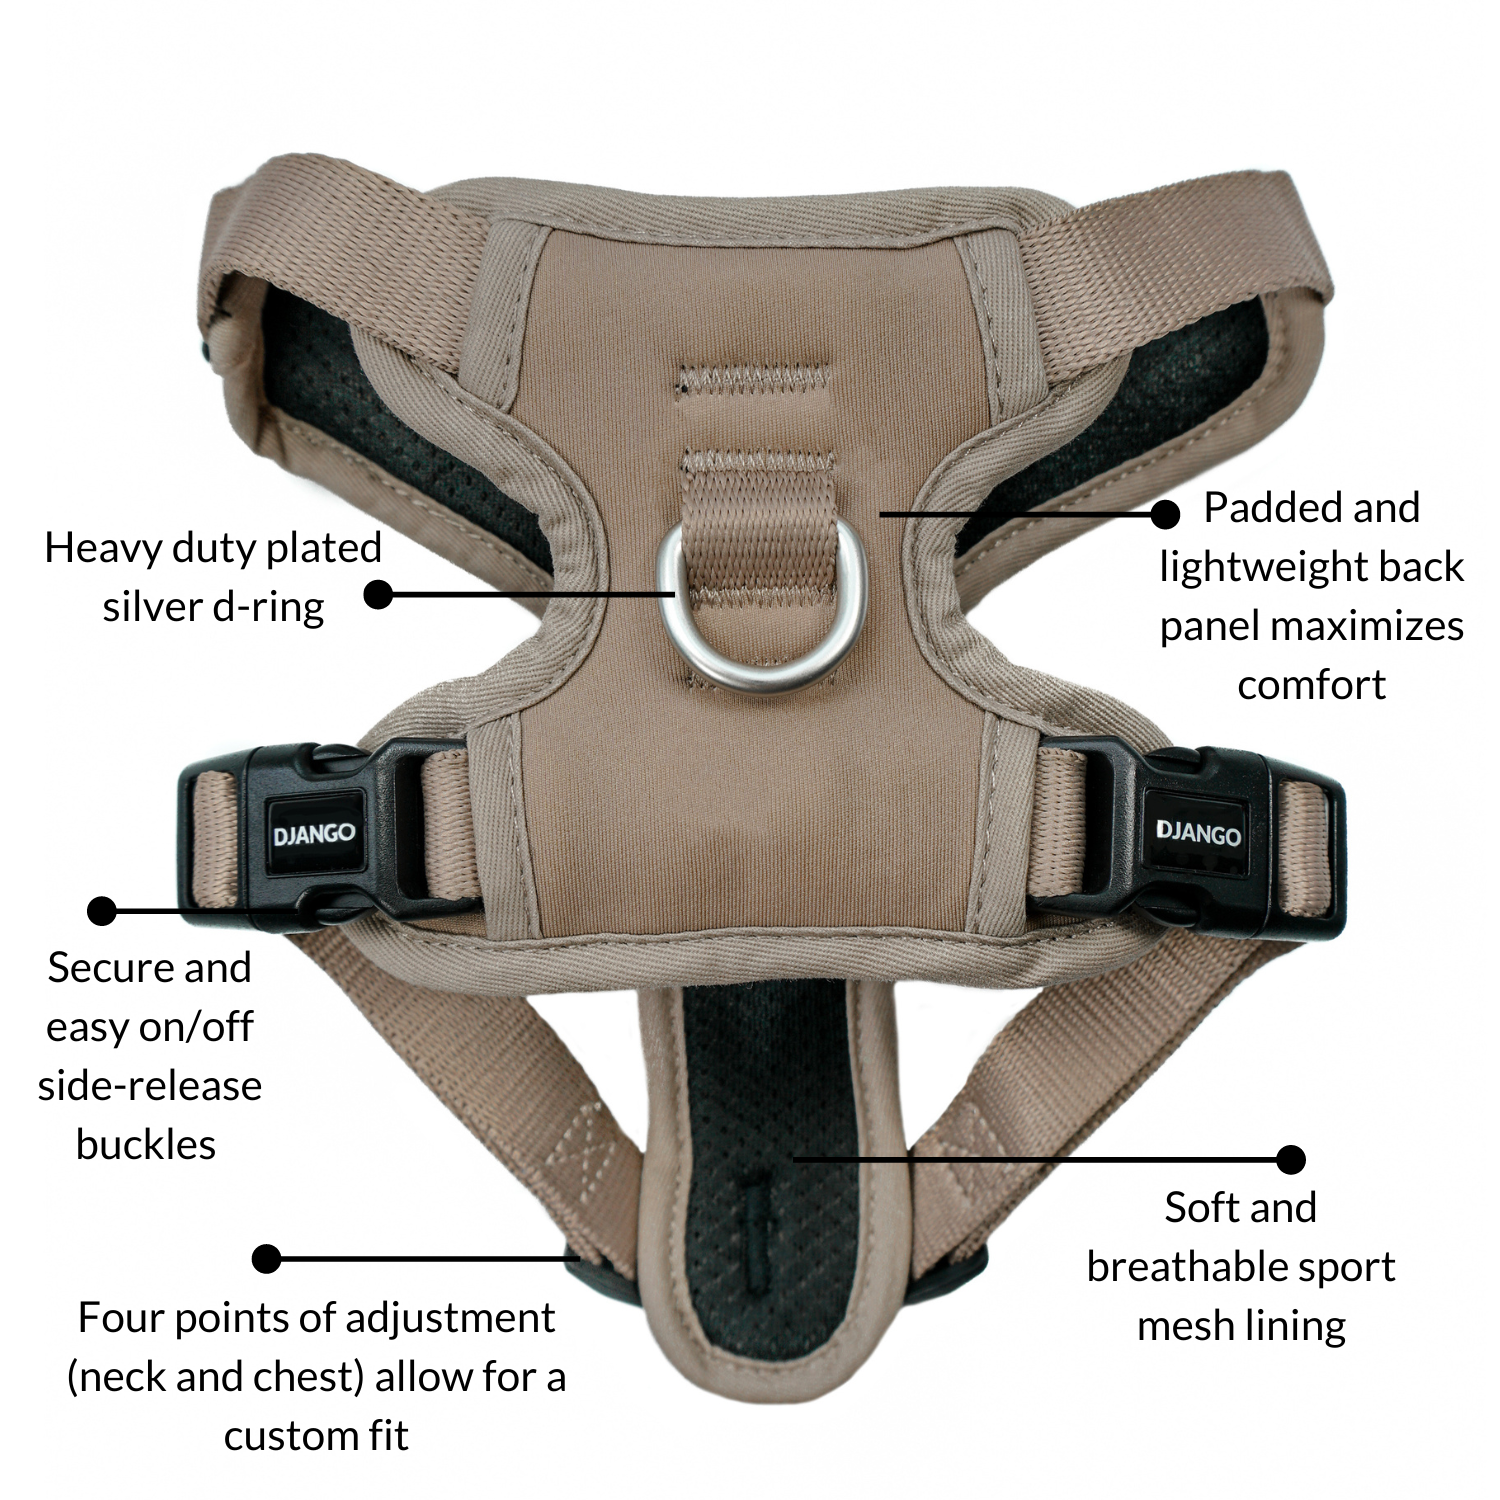 DJANGO Tahoe No Pull Dog Harness in Sandy Beige - Additional features include a padded and lightweight back panel for added comfort, soft and breathable mesh lining, four points of adjustment, secure and easy on/off buckles, and heavy duty plated silver hardware. - djangobrand.com